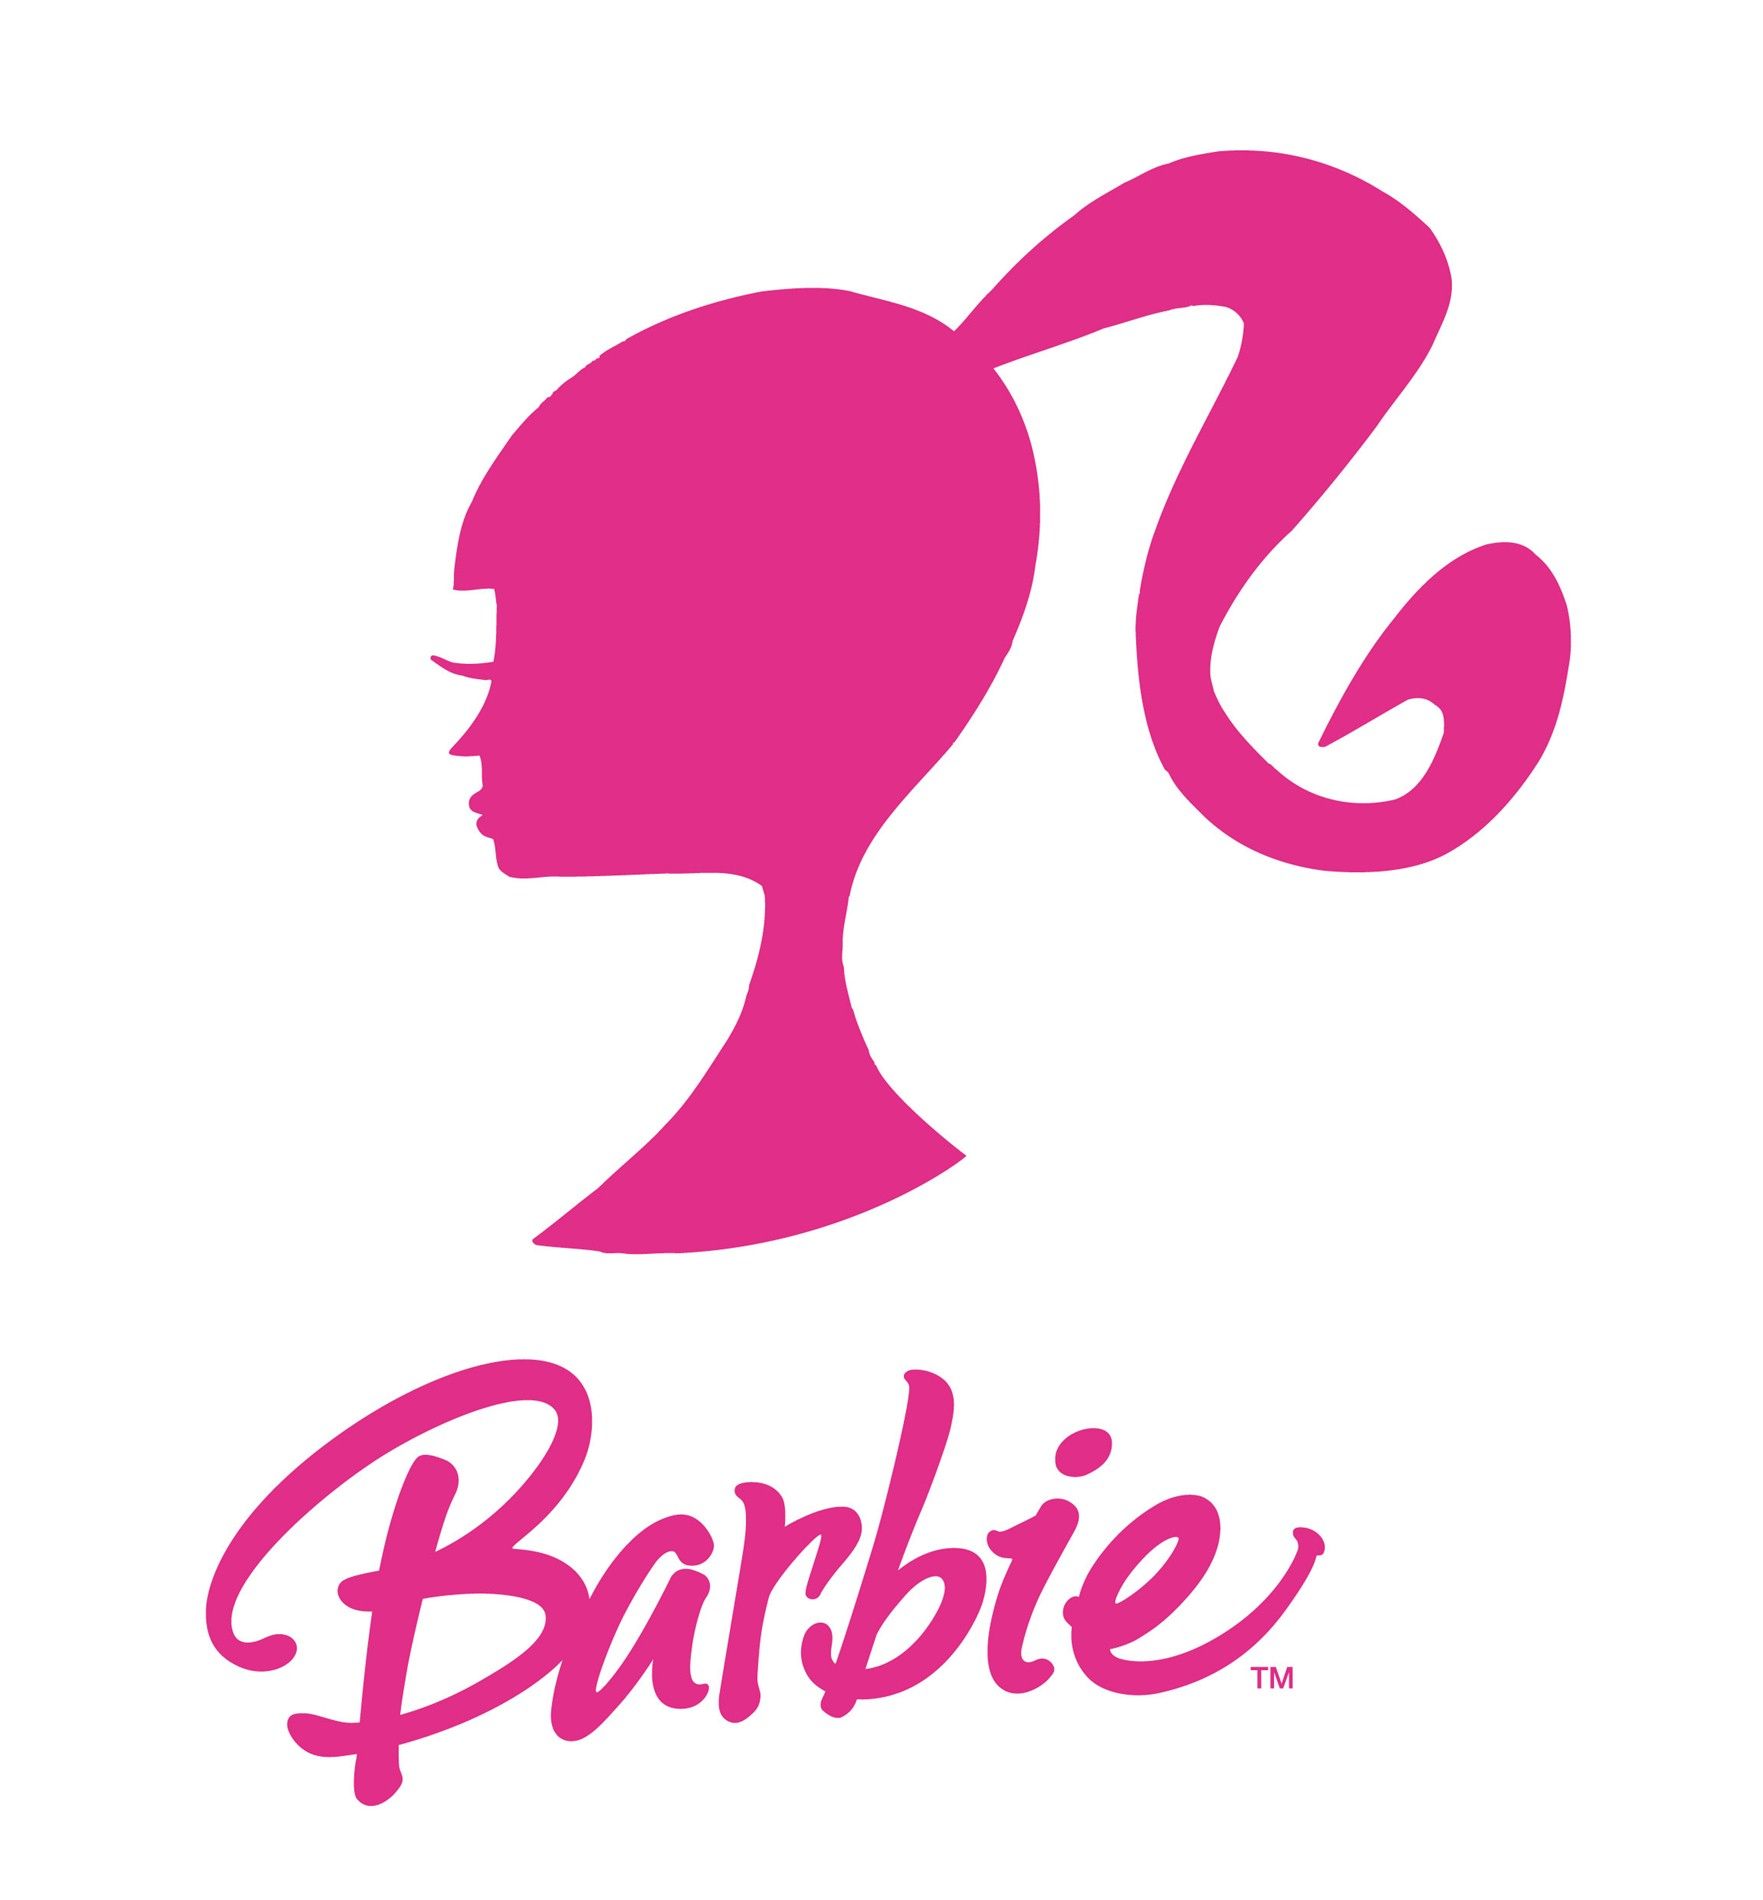 Barbie clipart head. This is what i